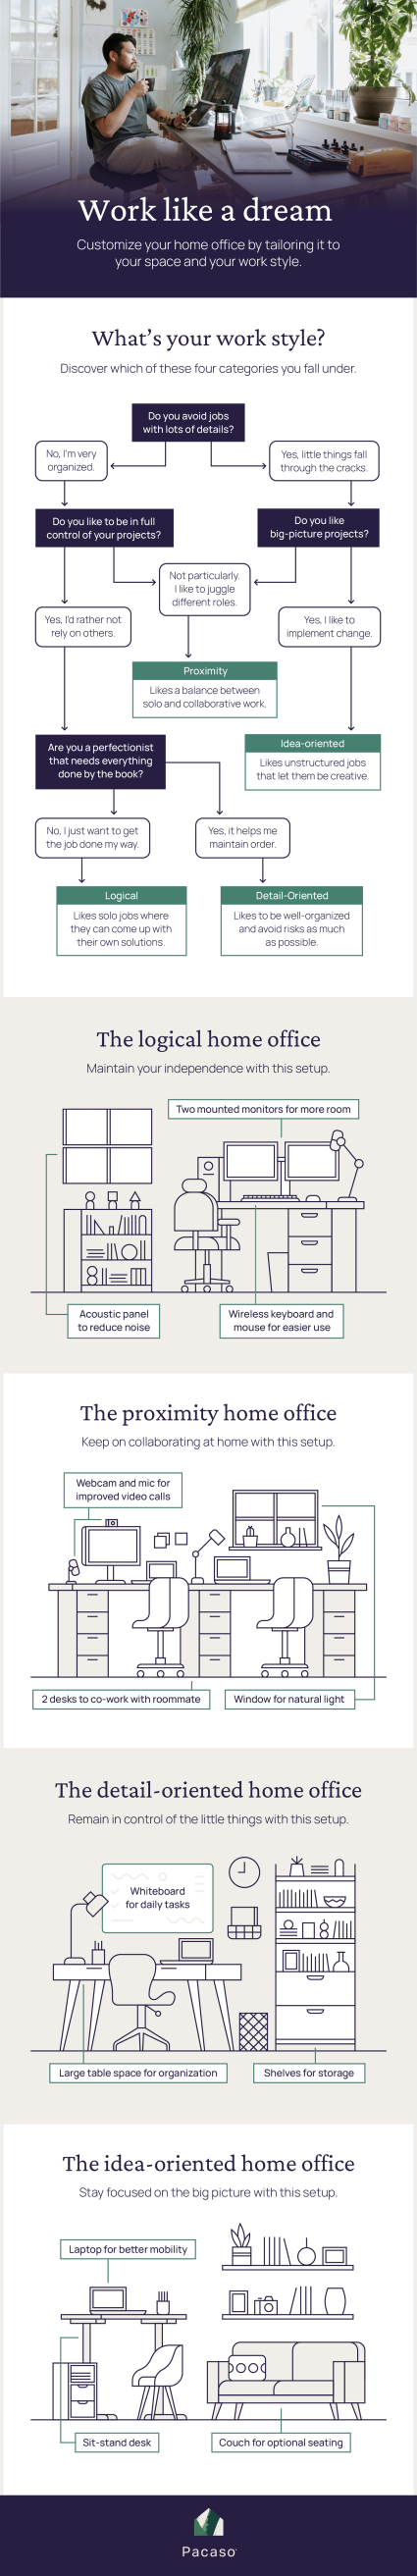 An infographic helps workers identify their preferred work style and perfect home office setup.